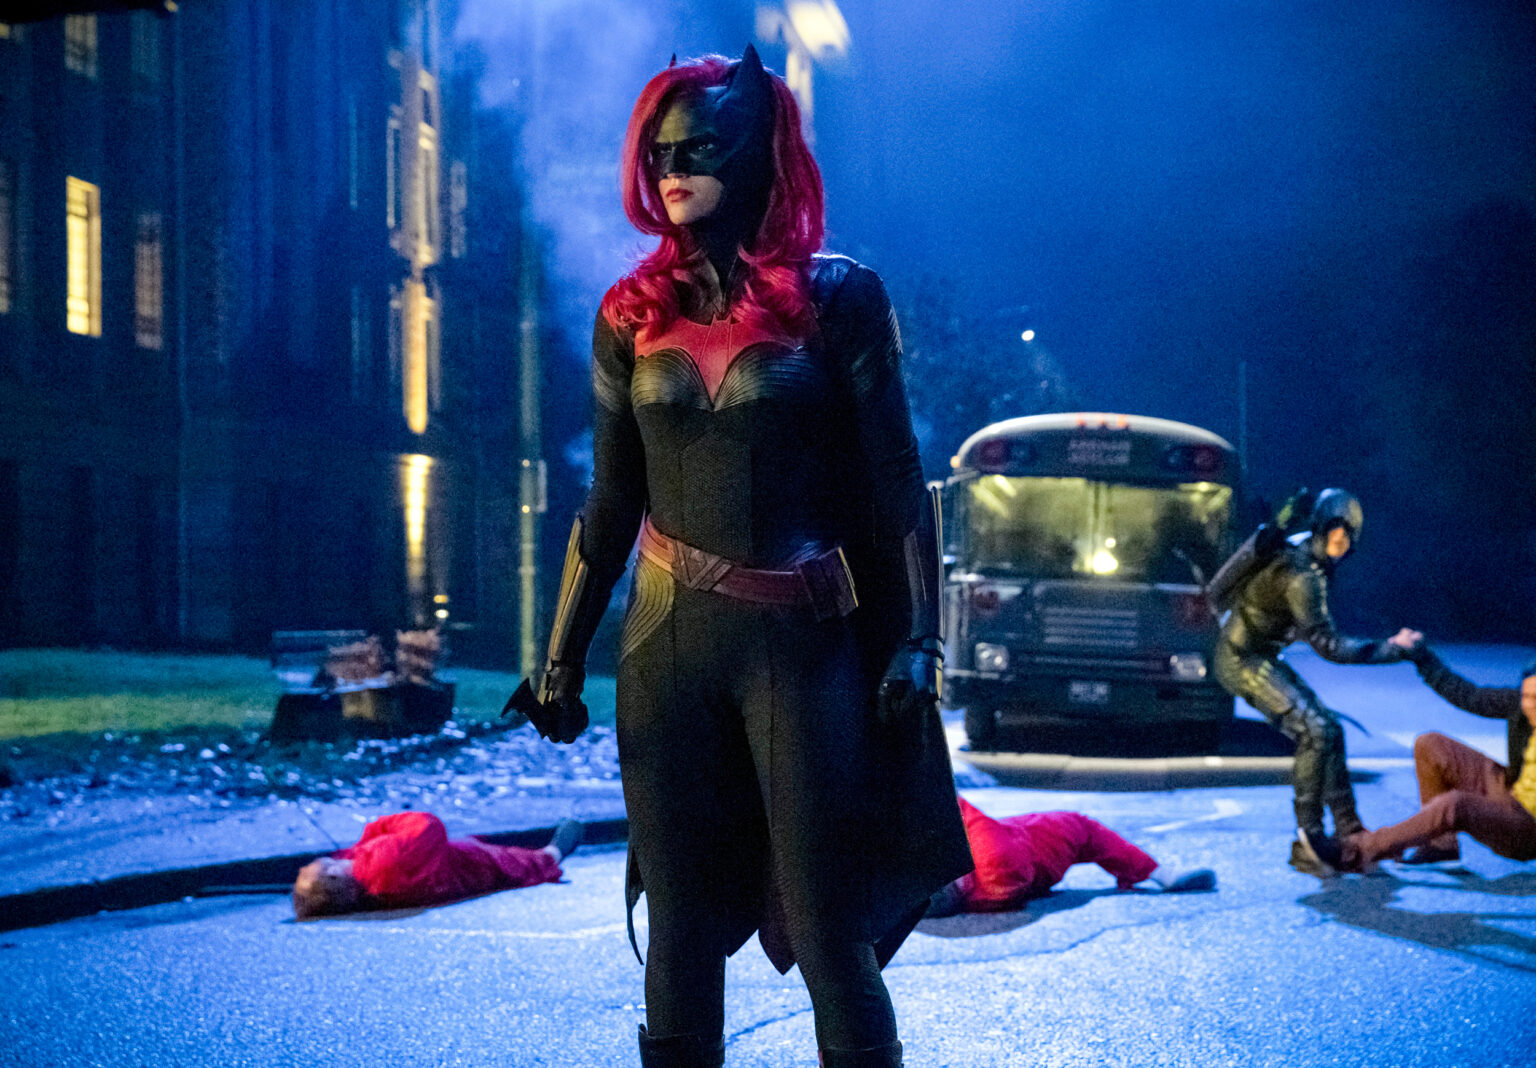 Meet Ryan Wilder, The CW's new Batwoman. Discover how she fits into the series and how 'Batwoman' season 2 will be different.